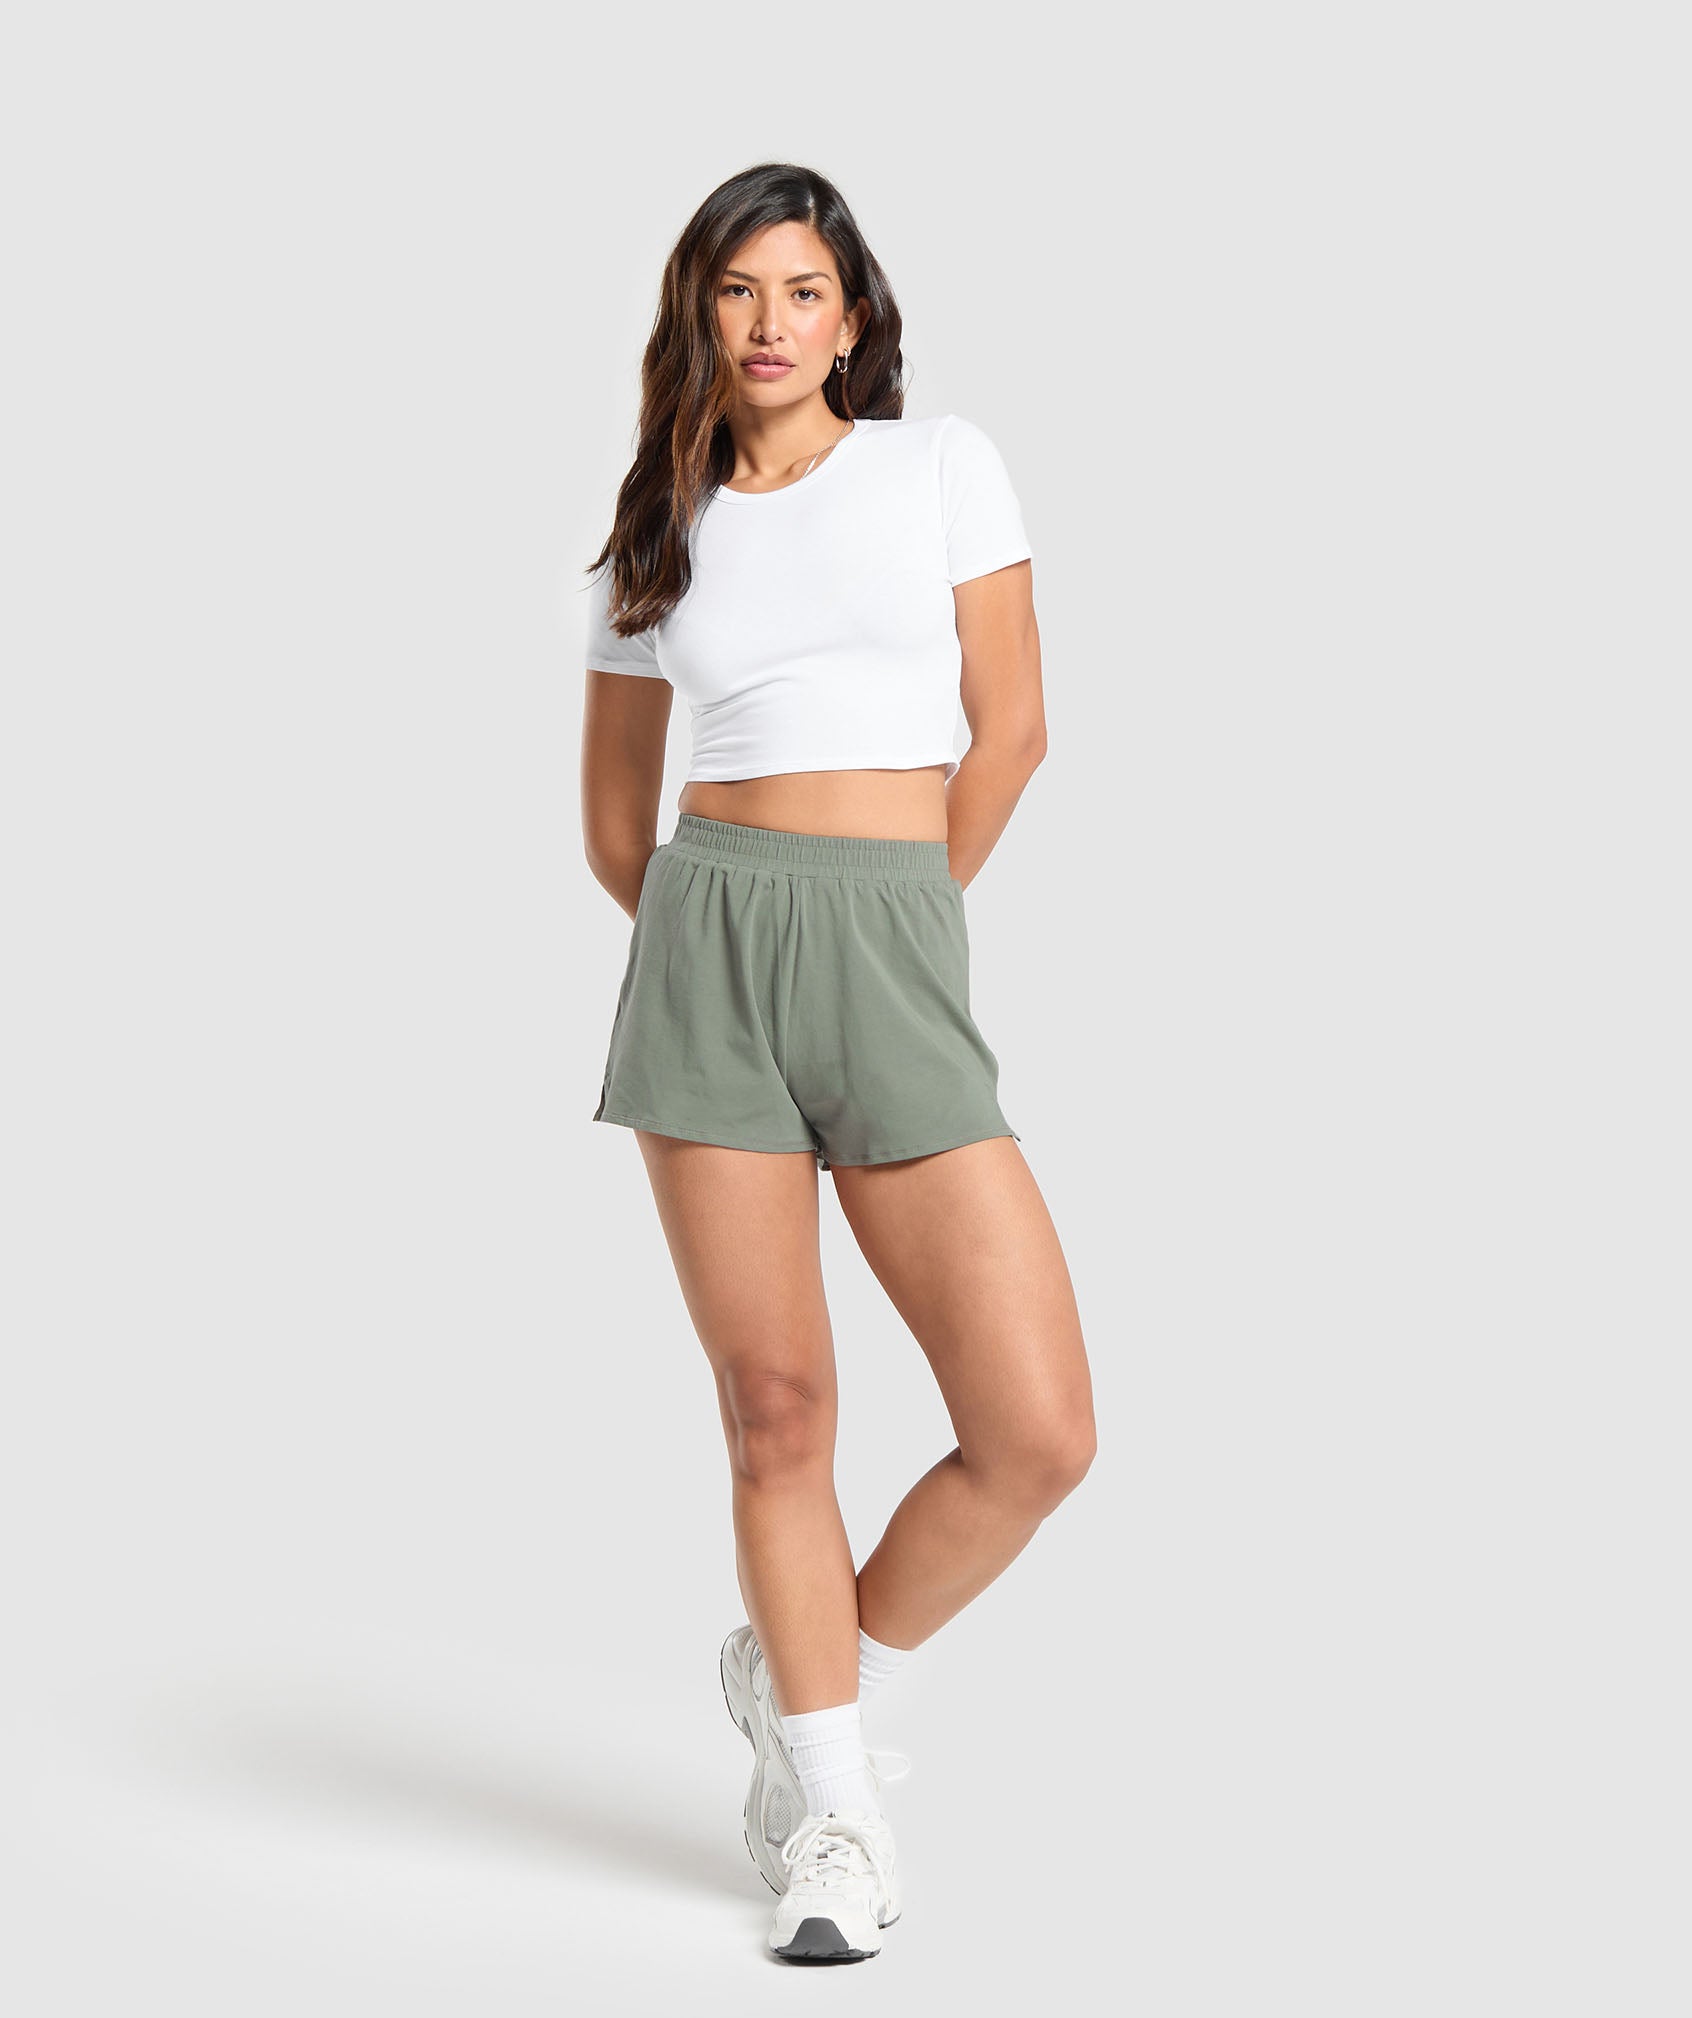 Cotton Crop Top in White - view 4